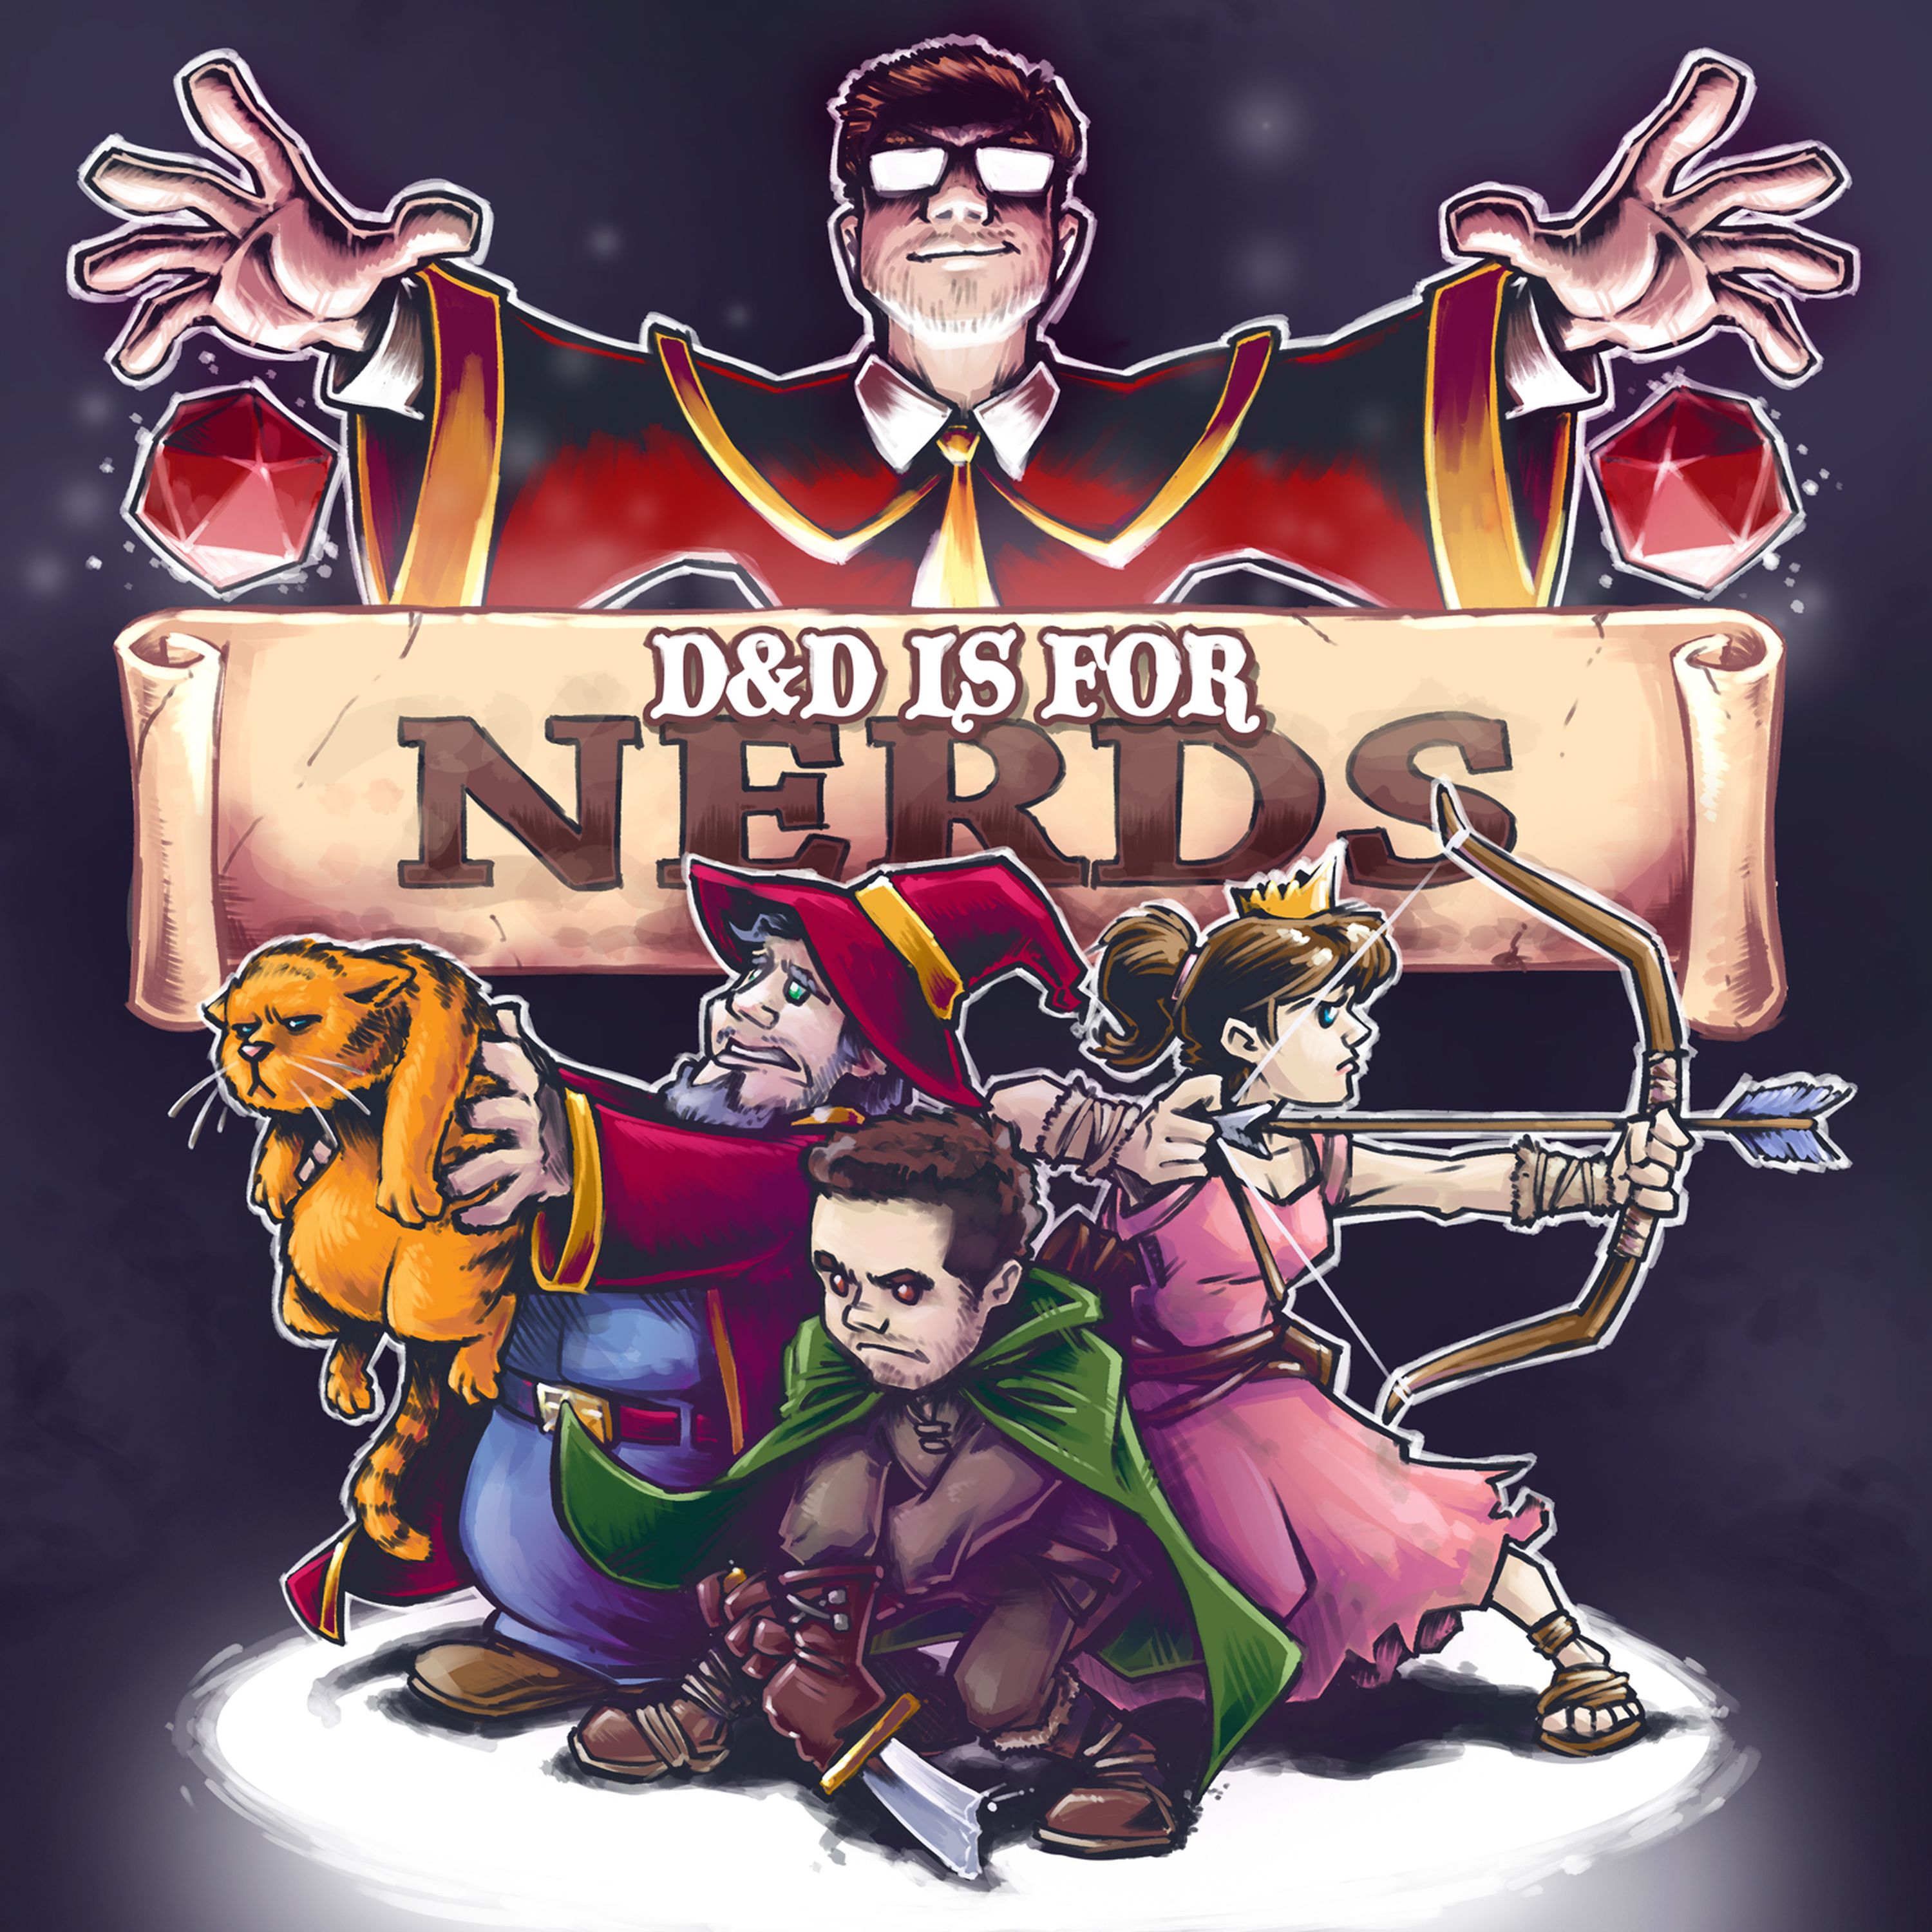 D&D is For Nerds Promo #2